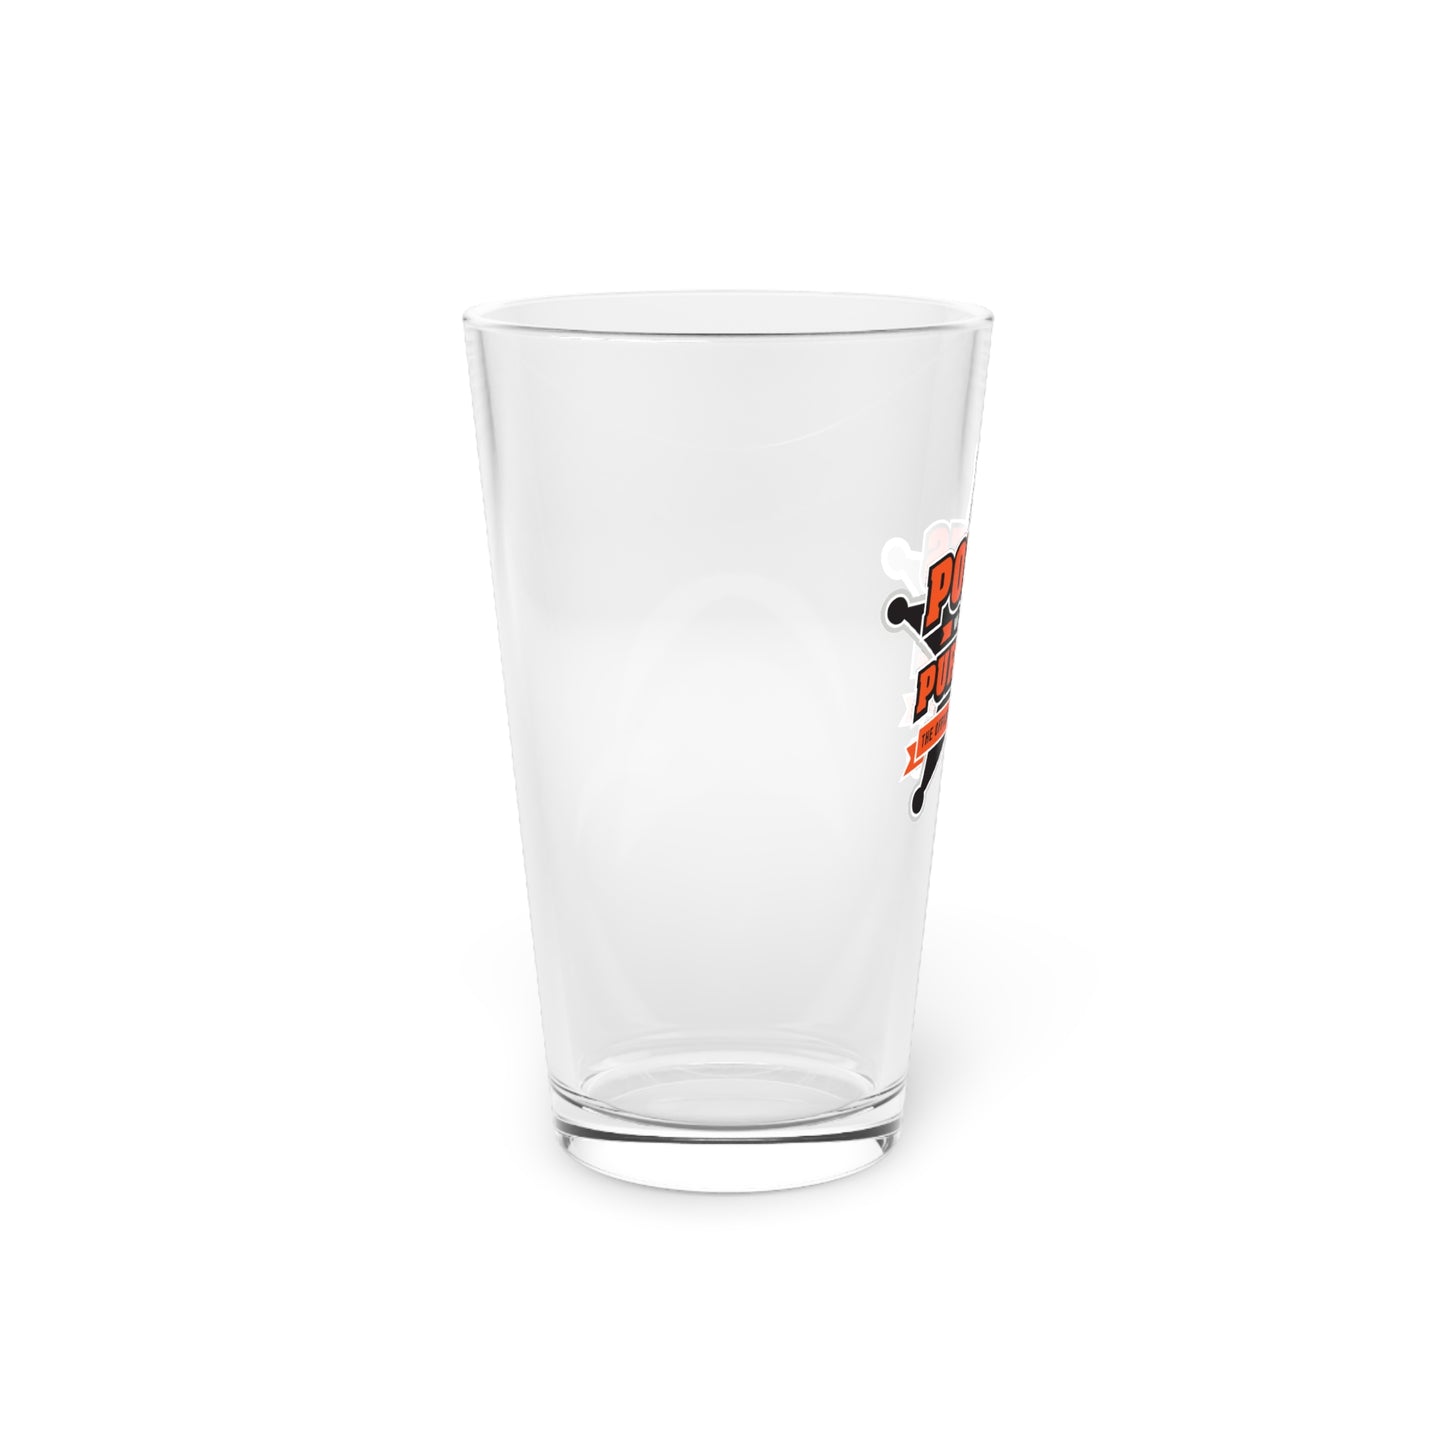 Pokes With A Purpose Pint Glass, 16oz